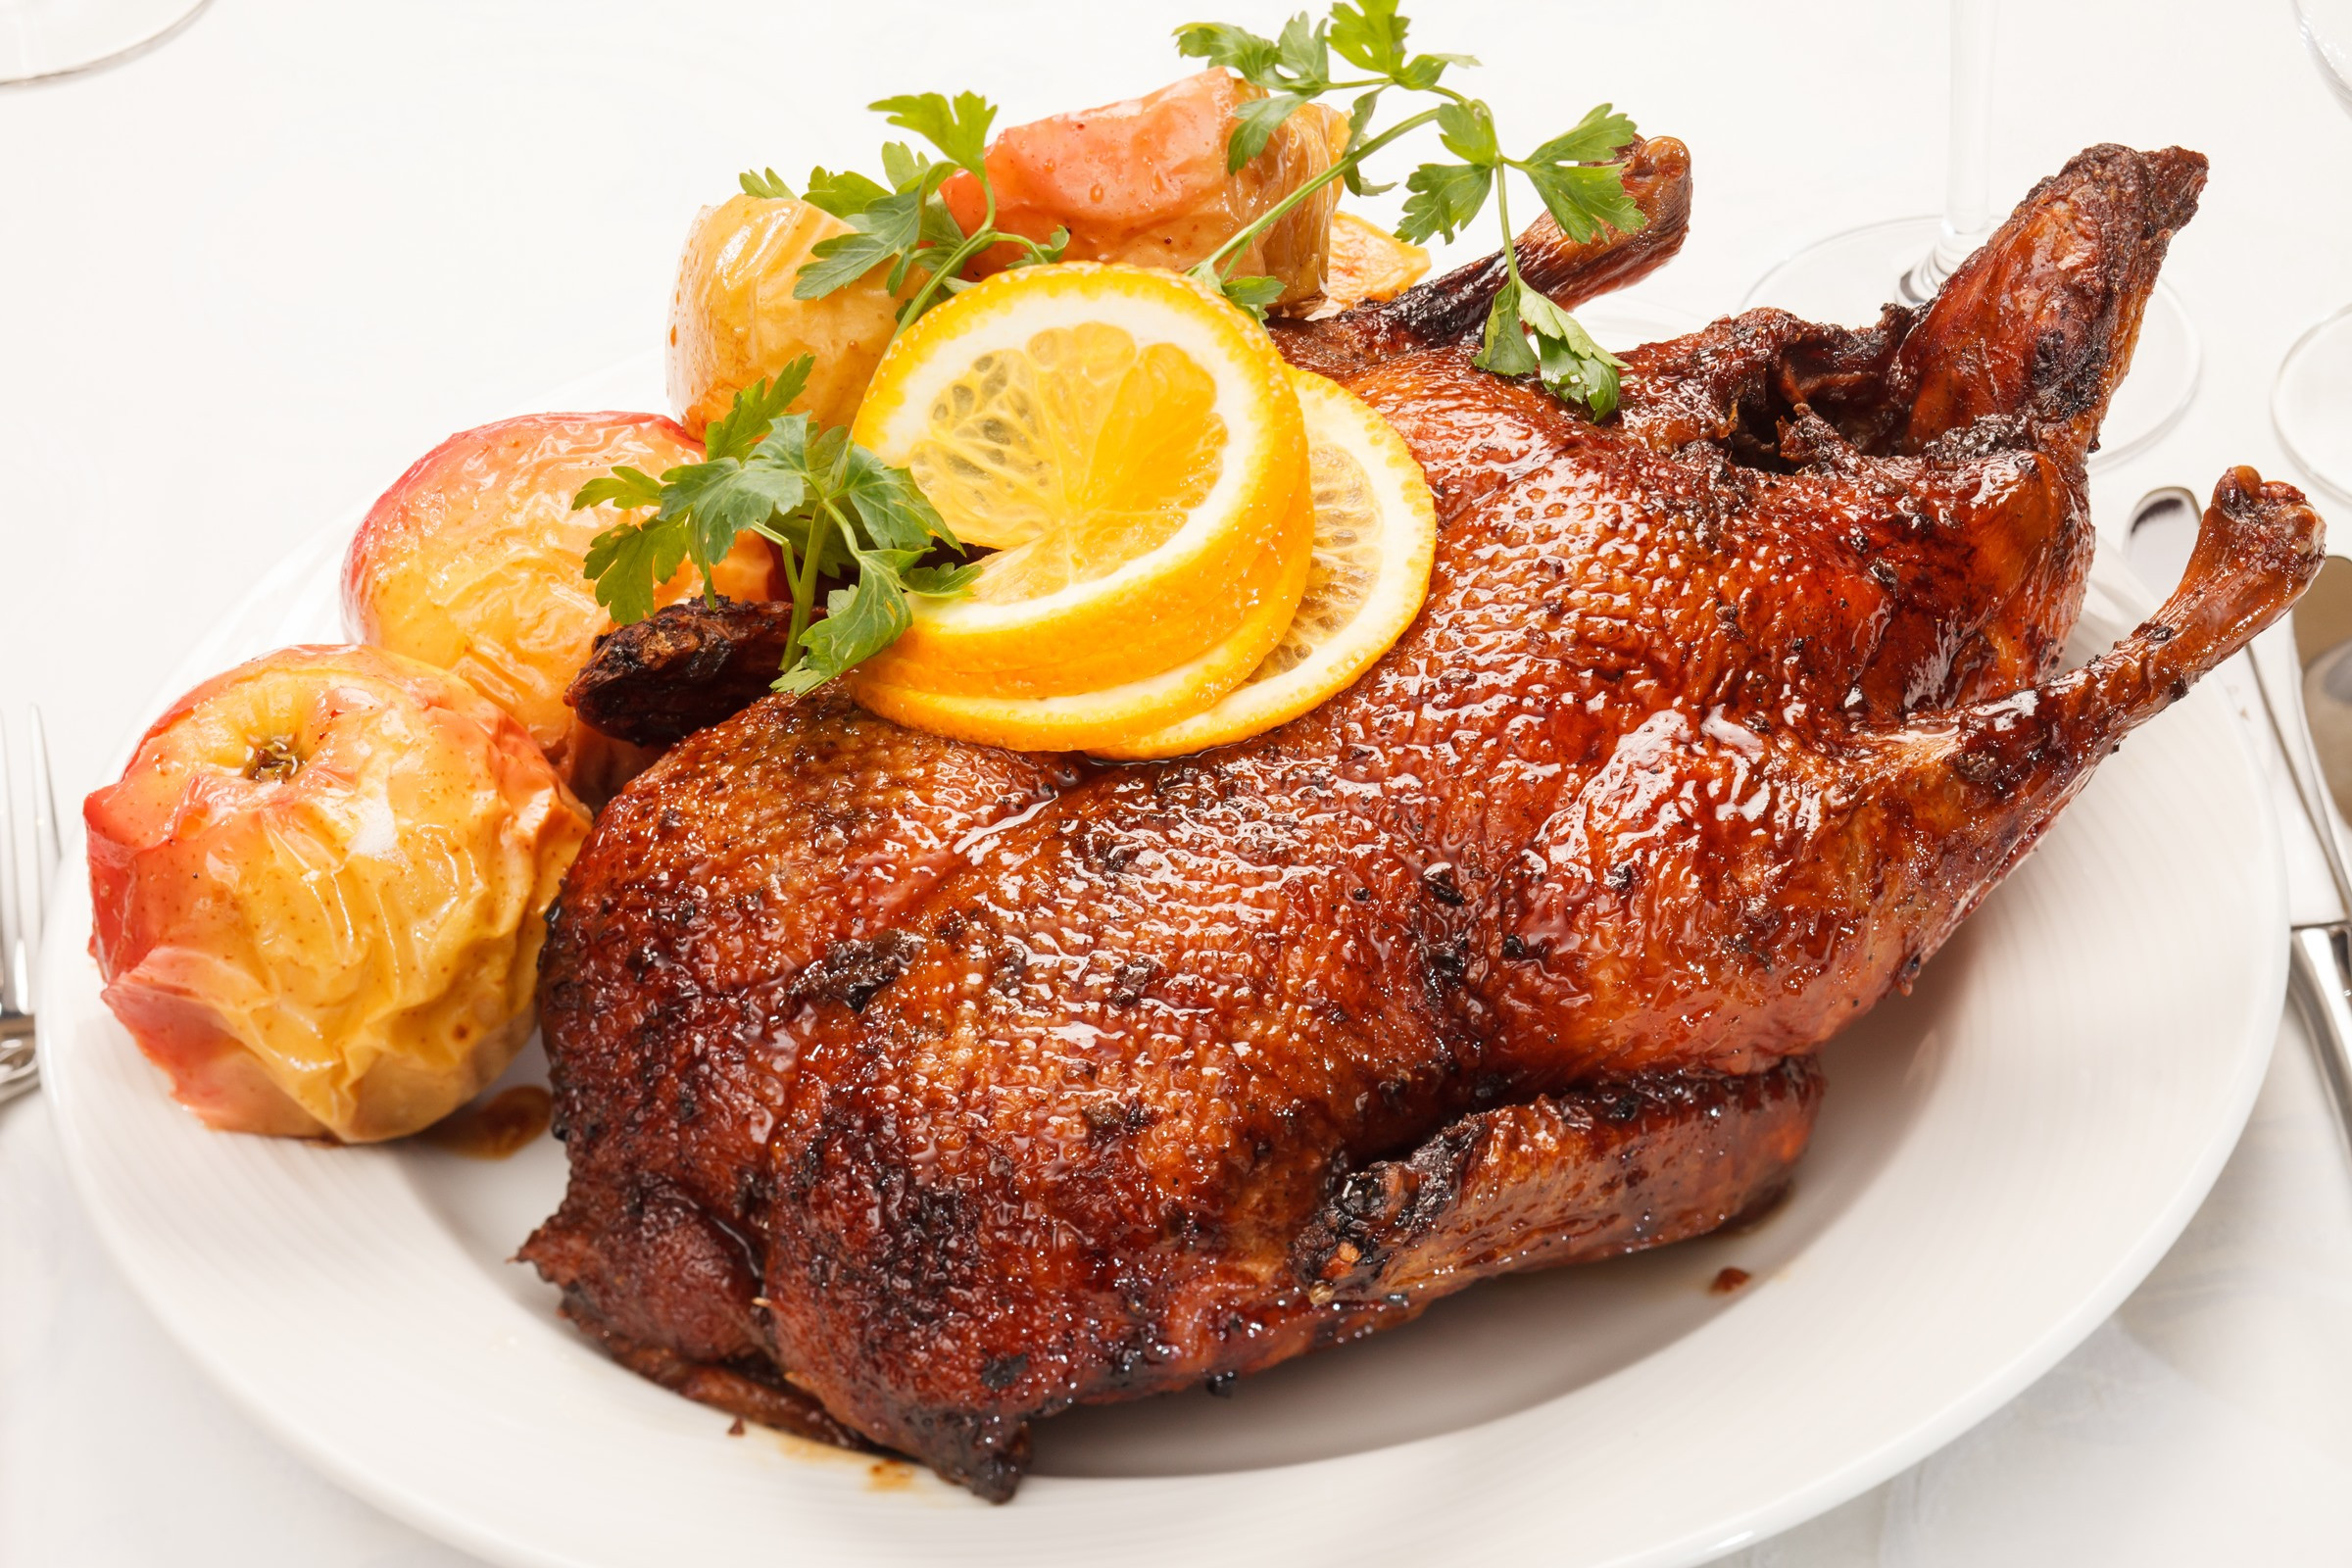 Christmas Goose Recipes
 A Roast Goose Recipe fit for the Christmas Table